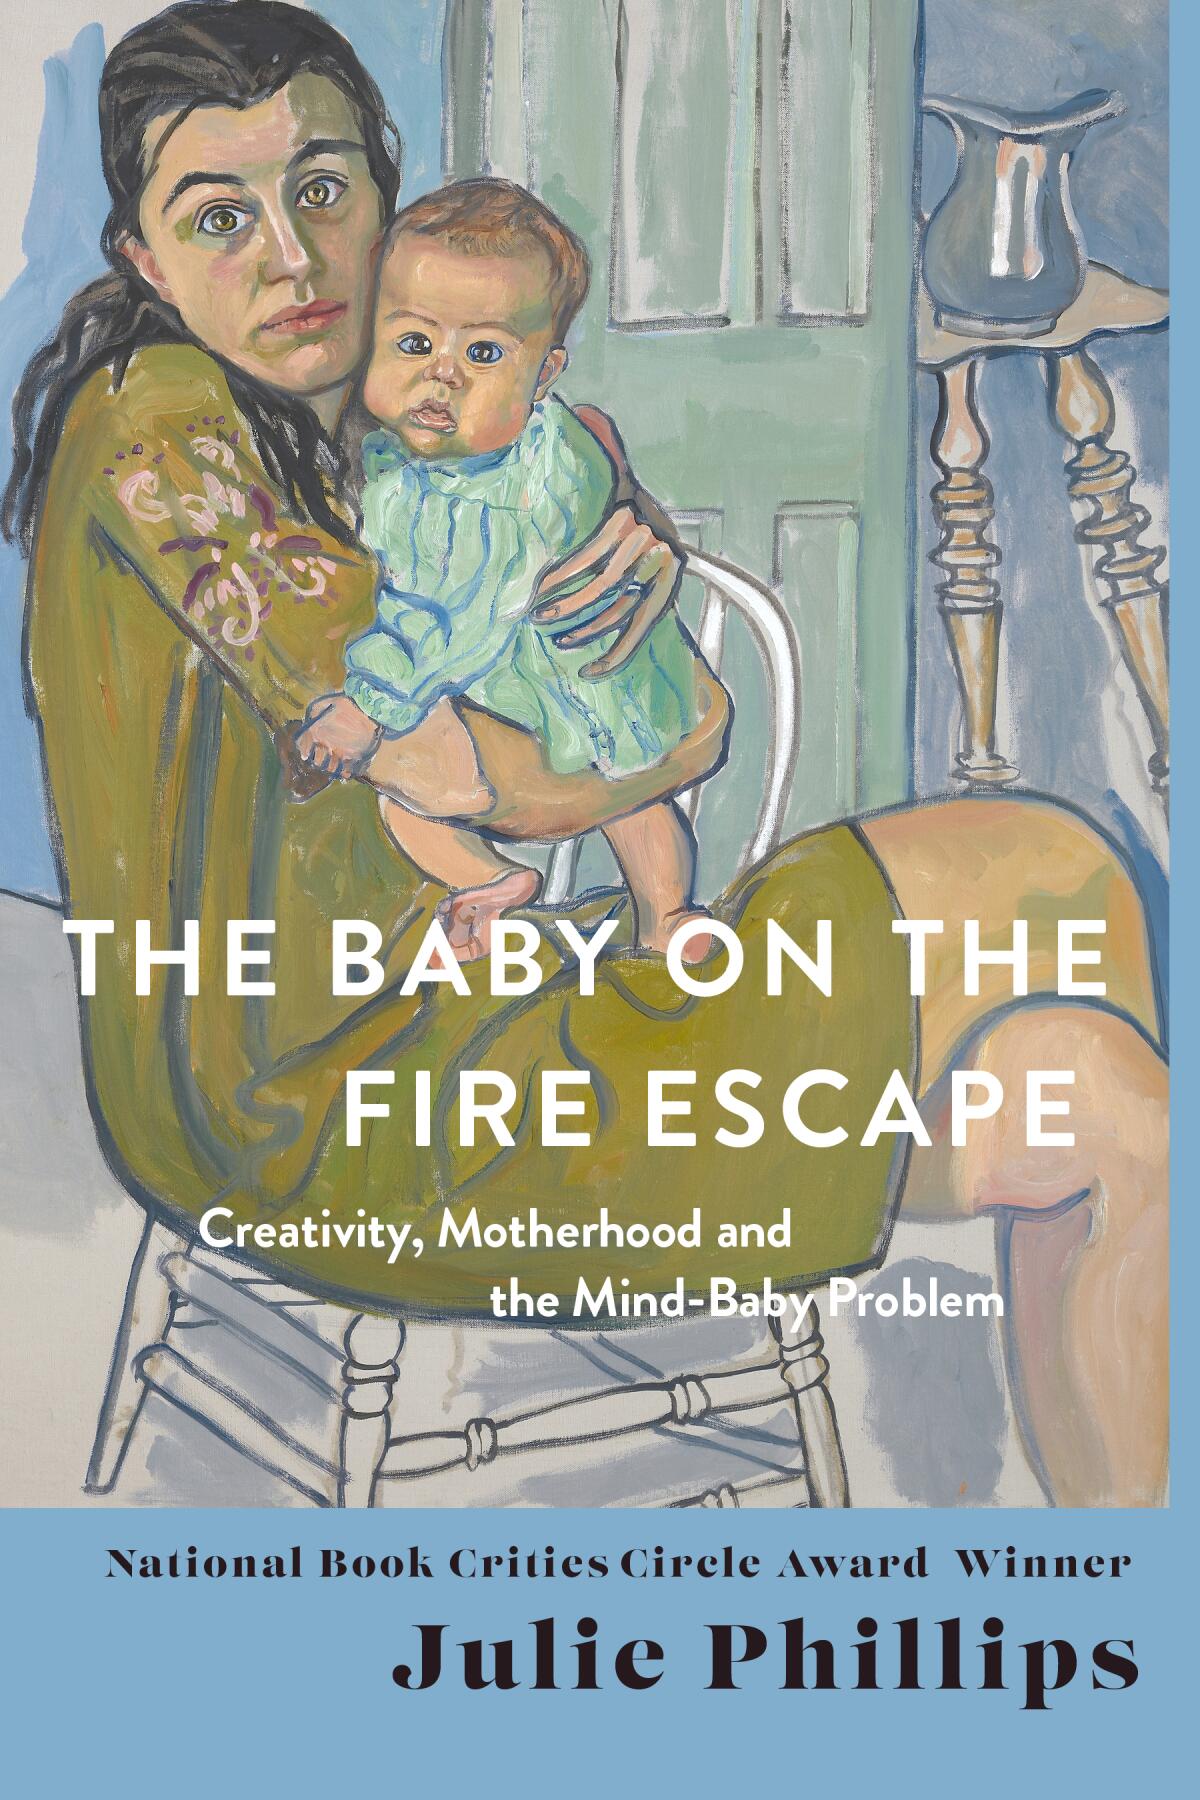 "The Baby on the Fire Escape: Creativity, Motherhood and the Mind-Baby Problem" by Julie Phillips